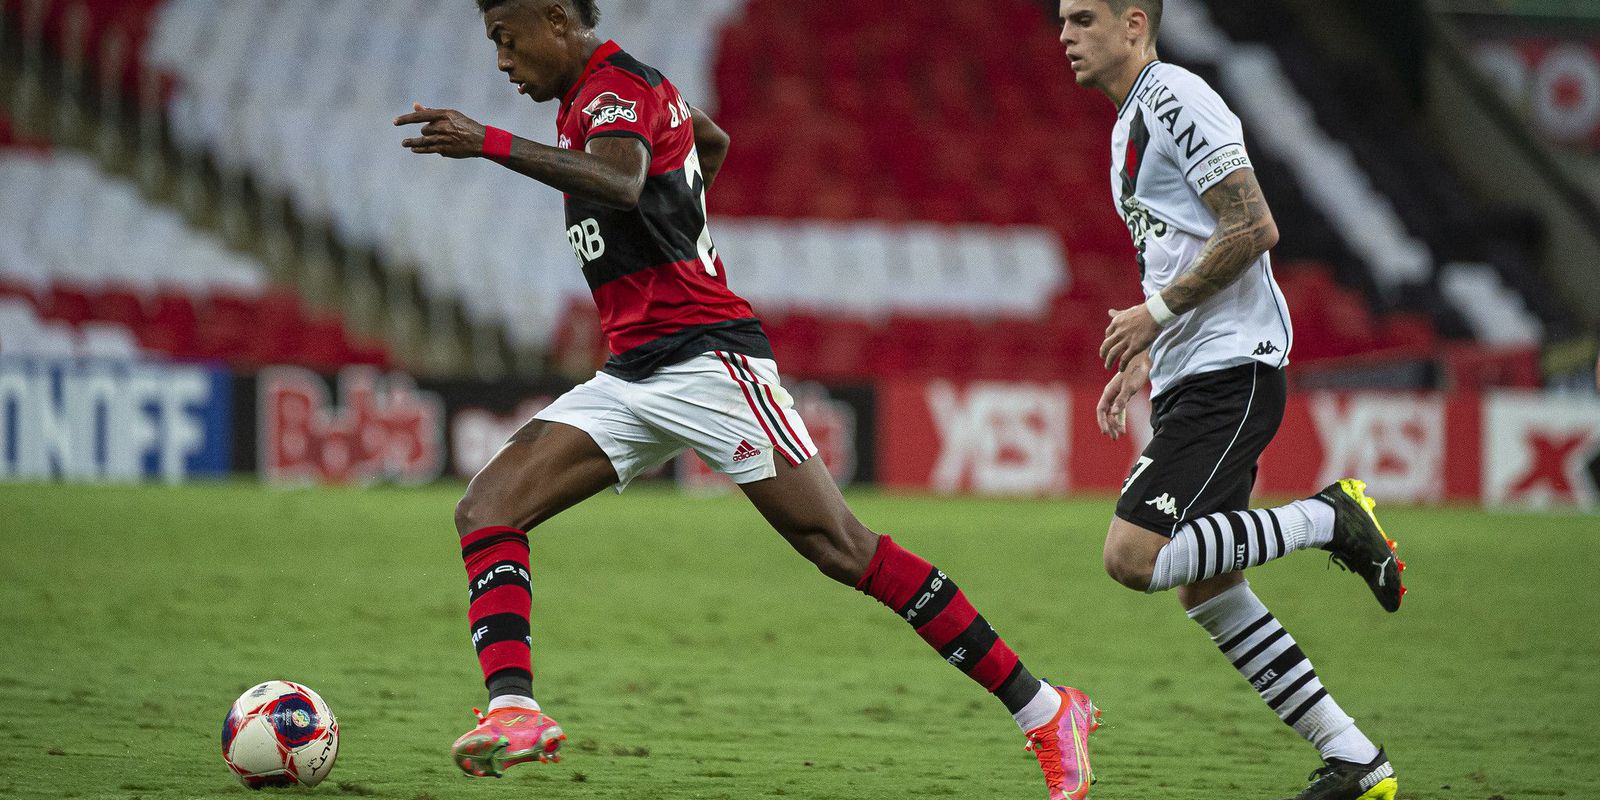 Flamengo and Vasco duel thinking about the Carioca Championship semifinals